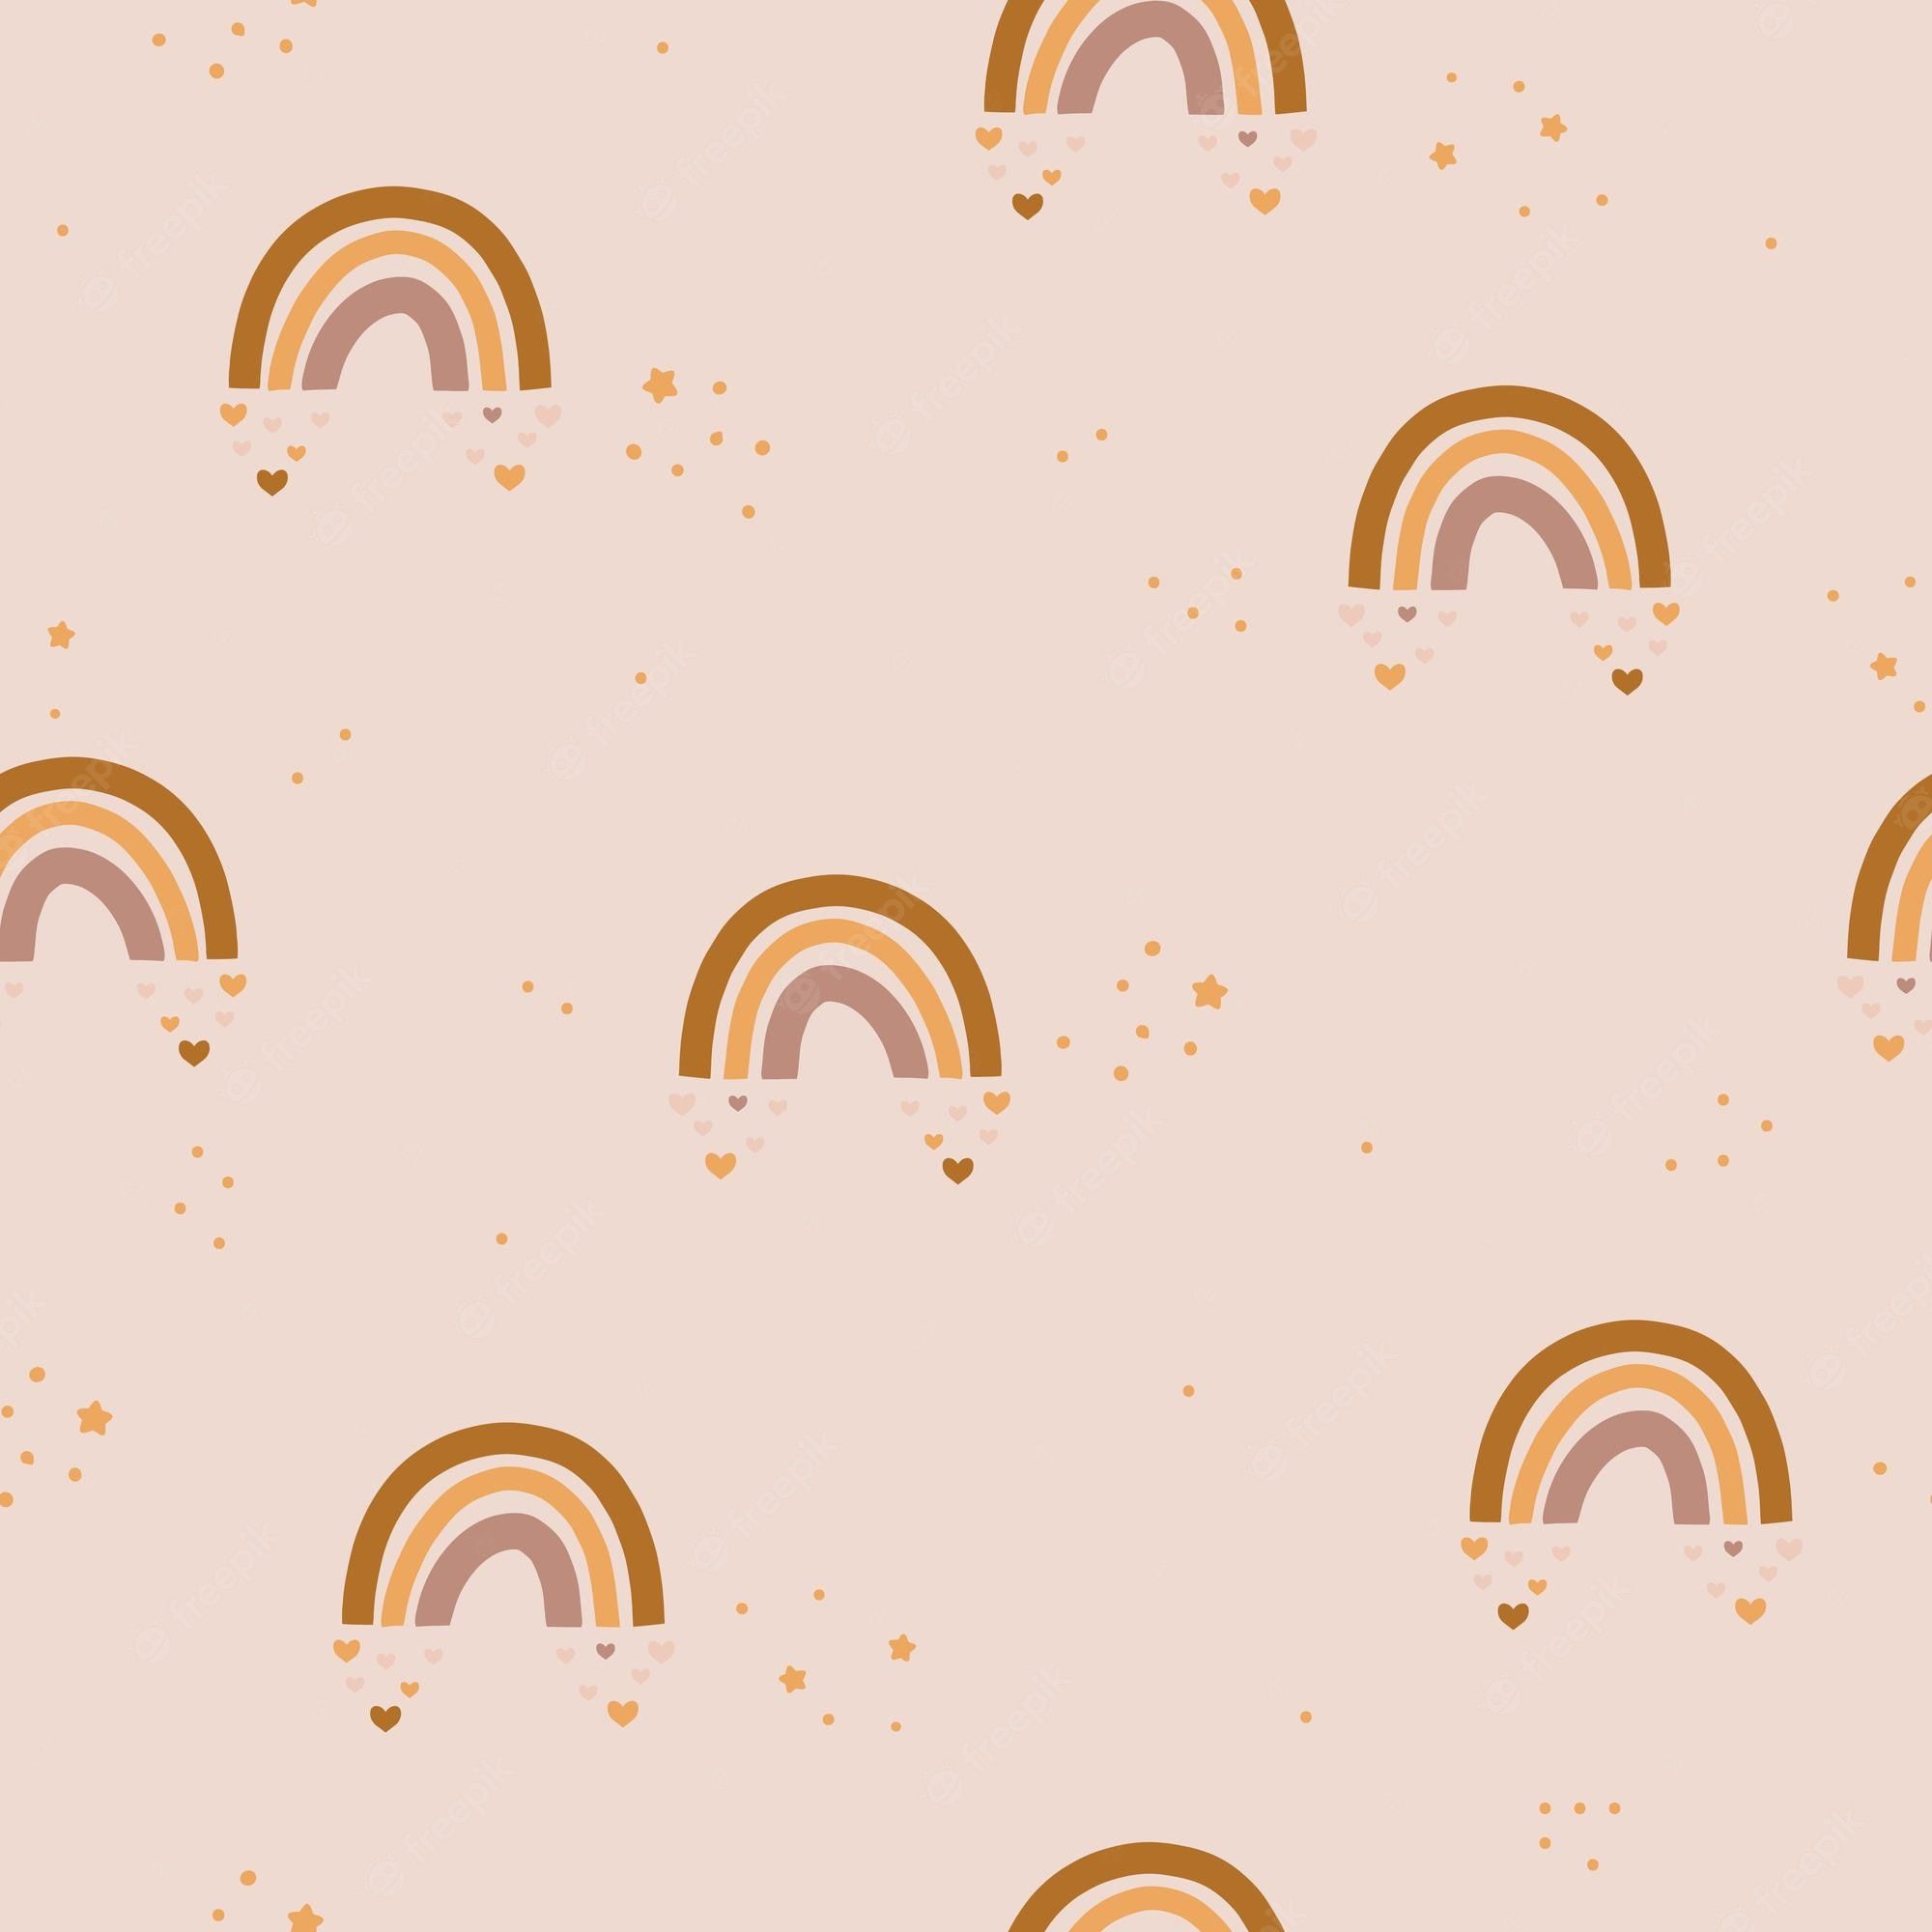 A pattern of rainbows and hearts on a light pink background - Boho